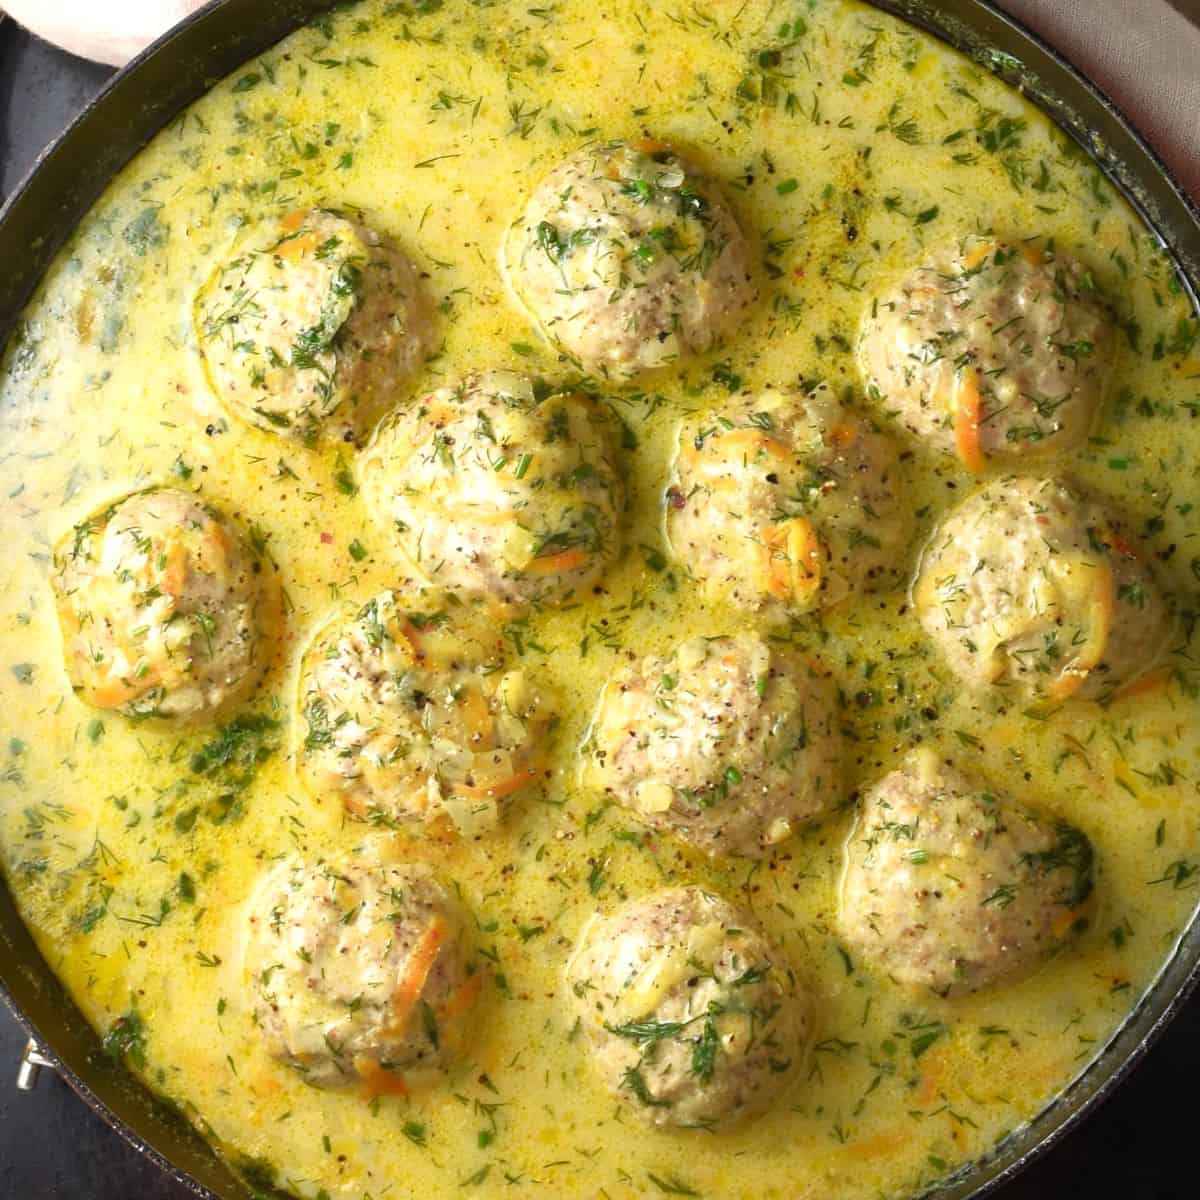 Top down view of Polish meatballs in dill sauce in shallow pan.